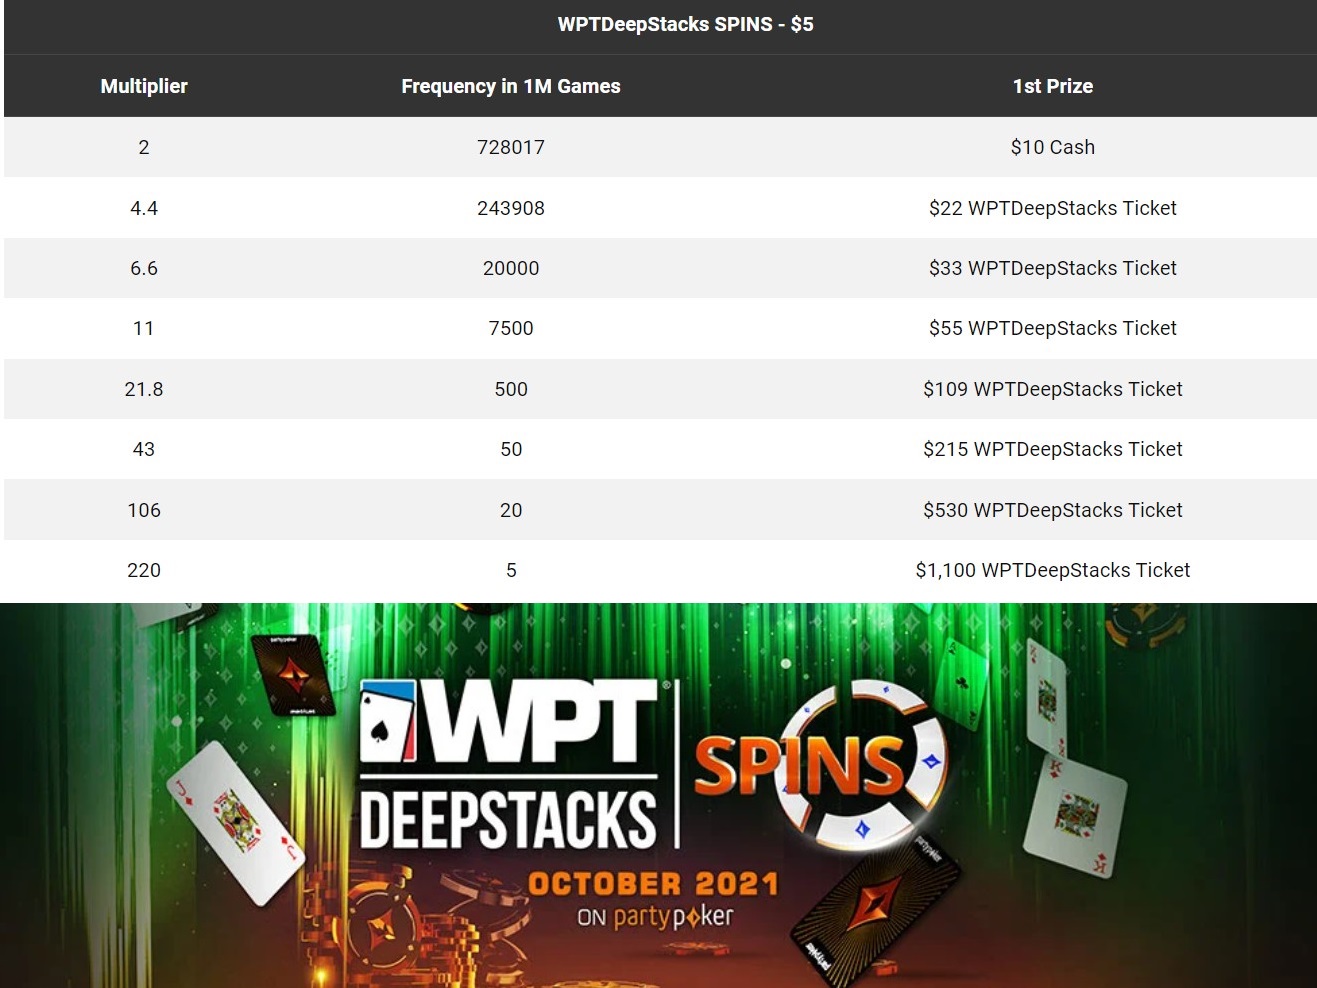 Win WPT DeepStacks Tickets at SPINS on partypoker